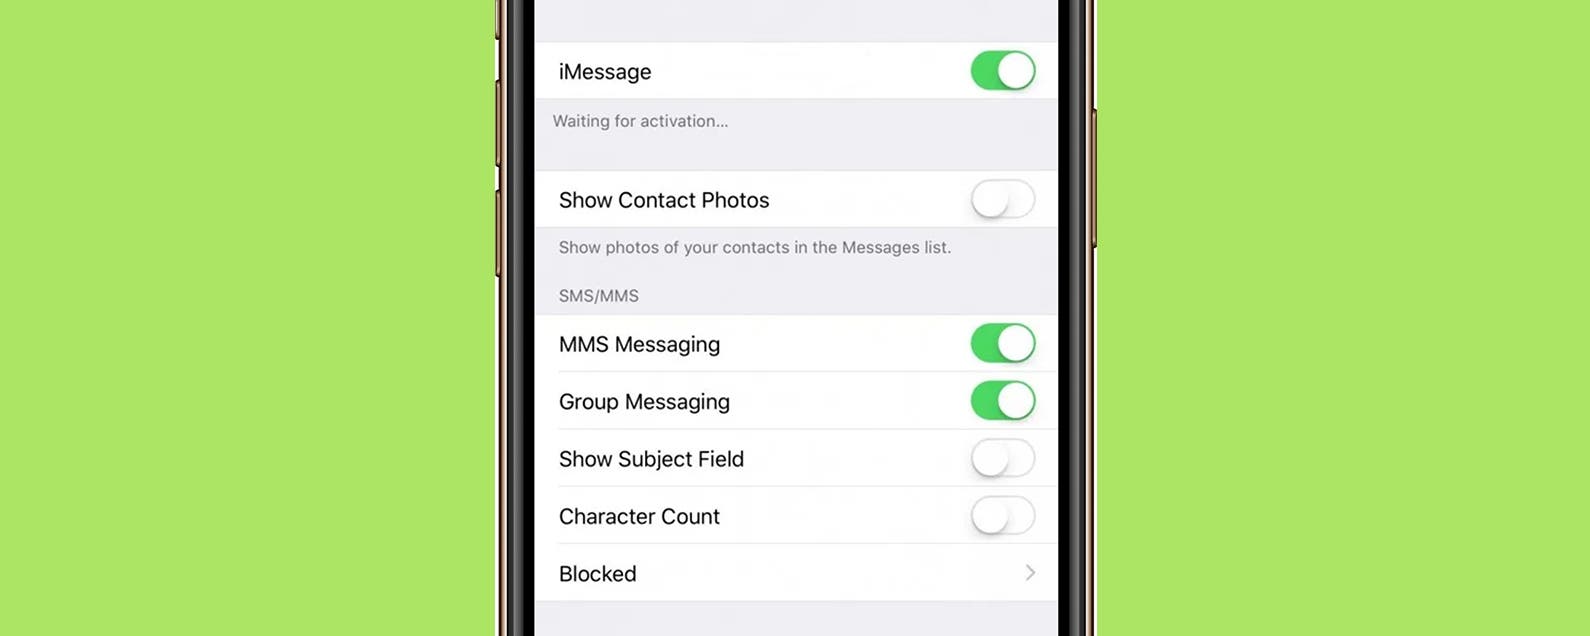 How to Fix iMessage Not Working on iPhone